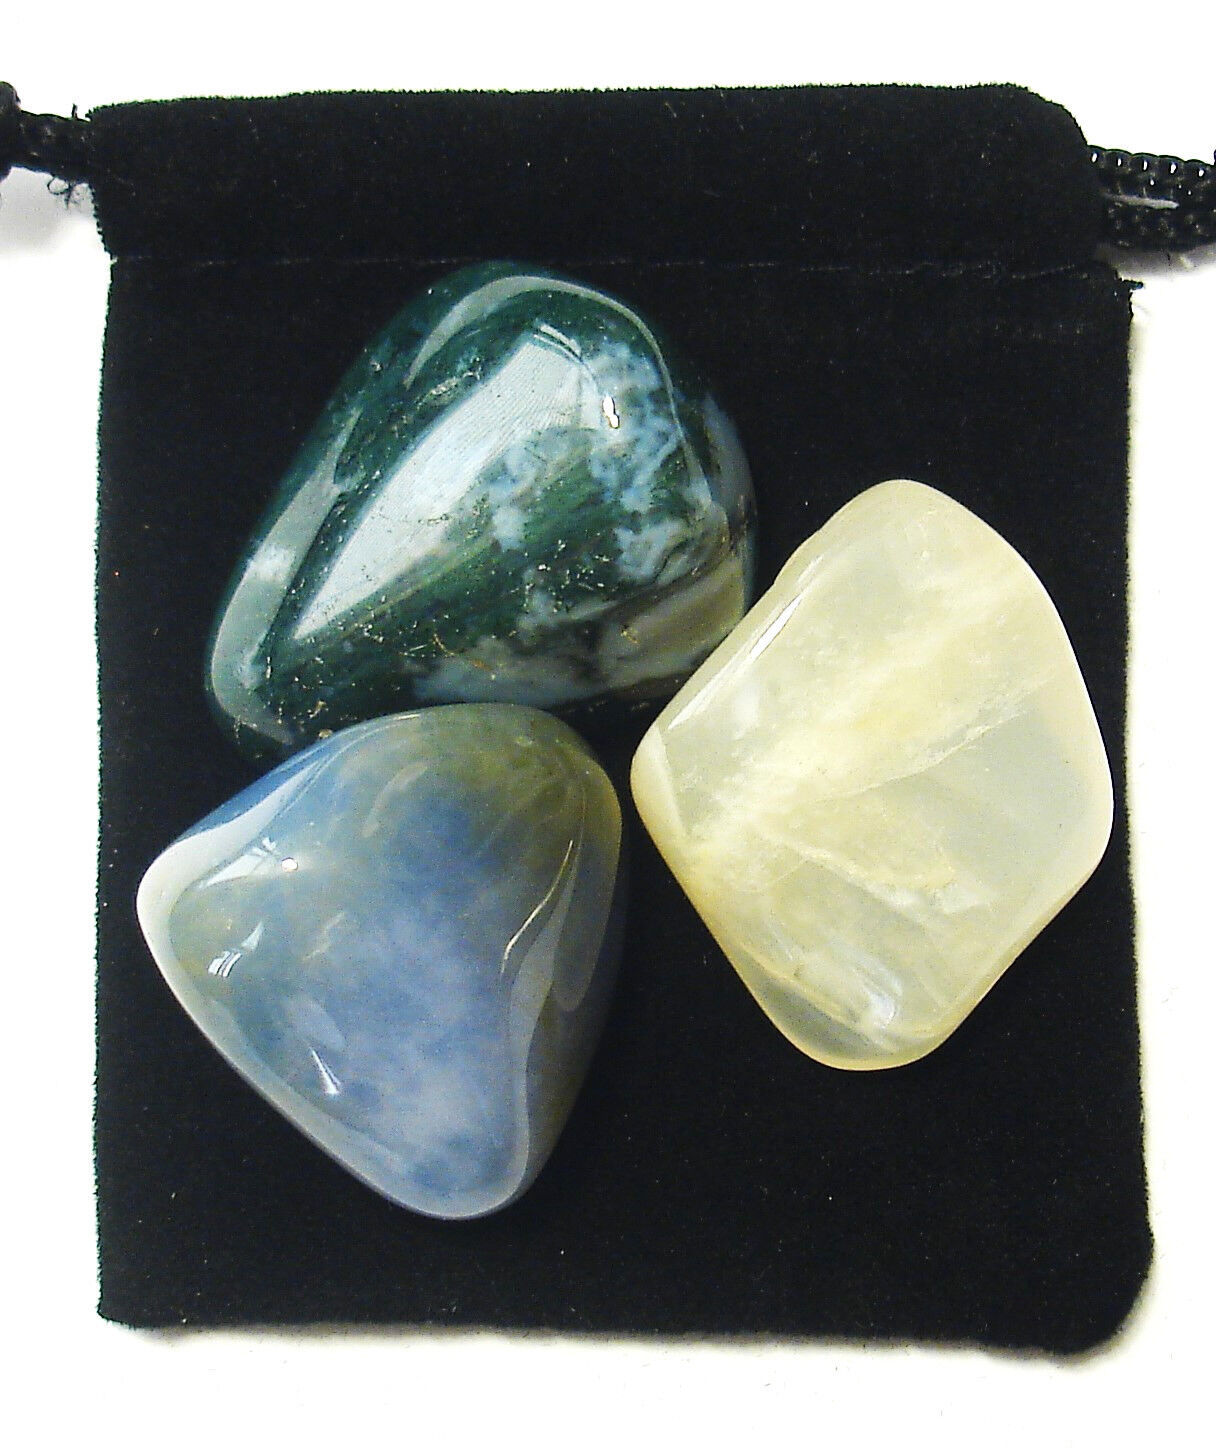 CANCER ZODIAC / ASTROLOGICAL Tumbled Crystal Healing Set = 3 Stones+ Pouch+ Card